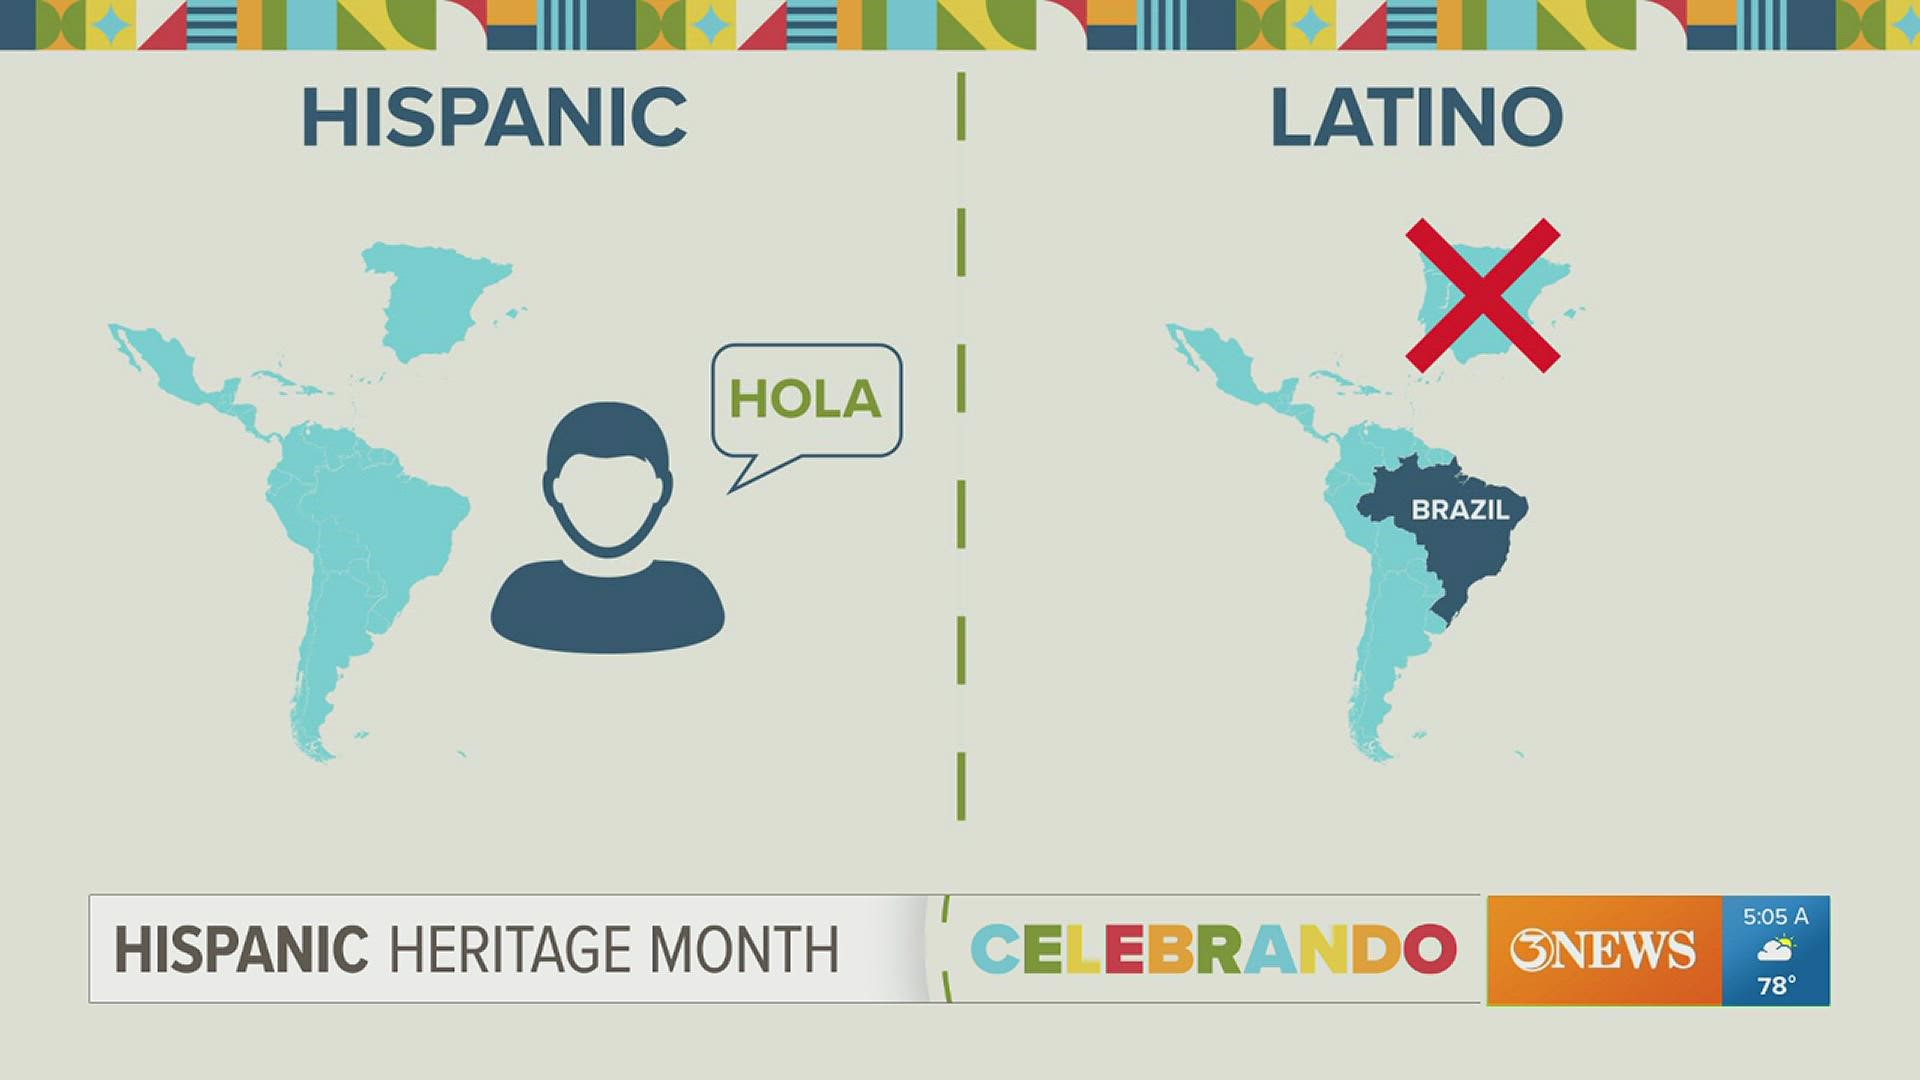 A Pew Research Center poll showed that 54 percent of Hispanic and Latino people in the U.S. have no preference to which term is used, but there is a difference.